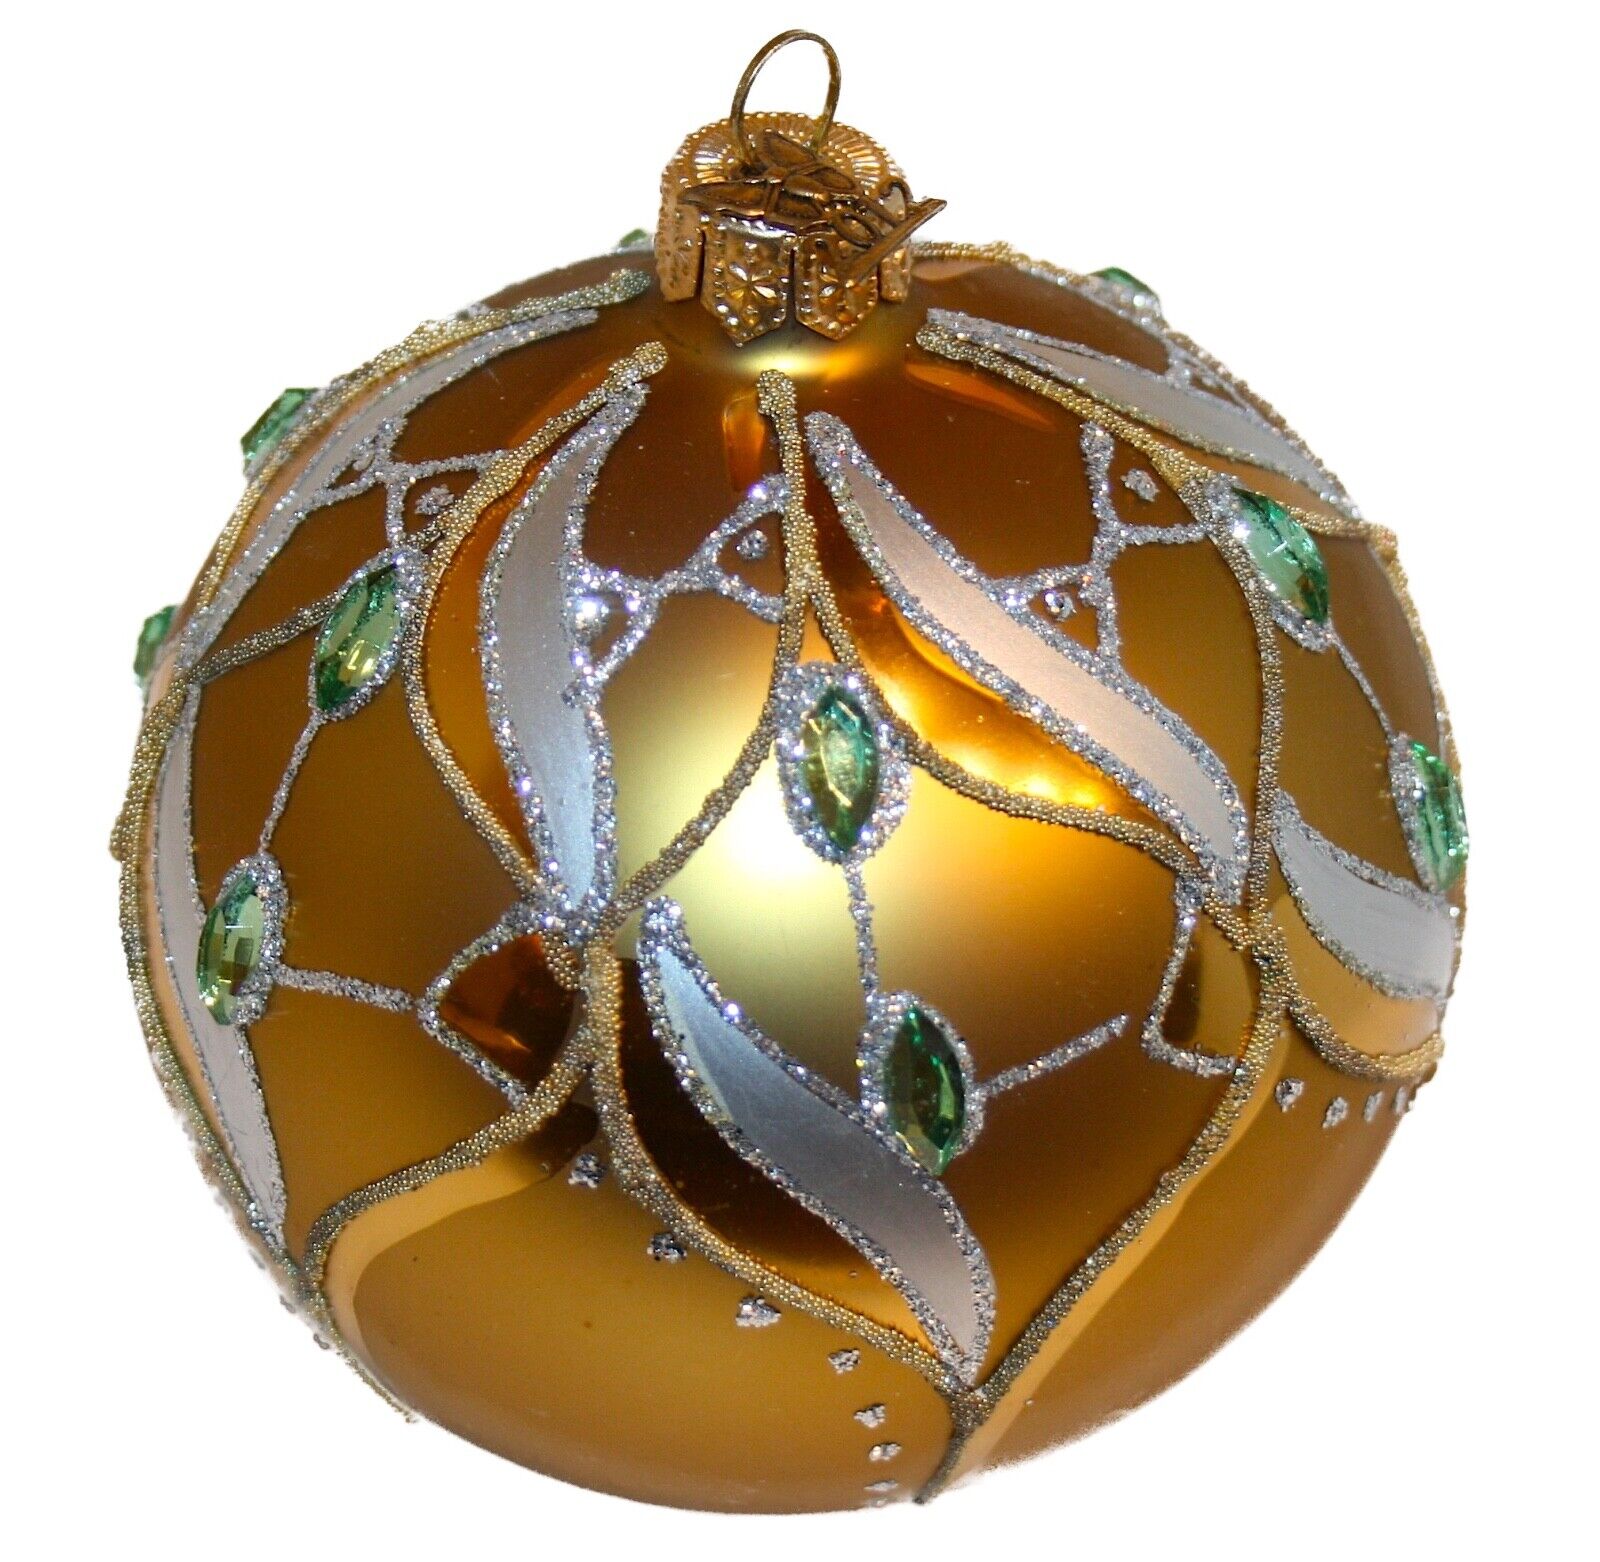 NEIMAN MARCUS Glass Christmas Ornament/Ball Bauble MADE IN POLAND 2012